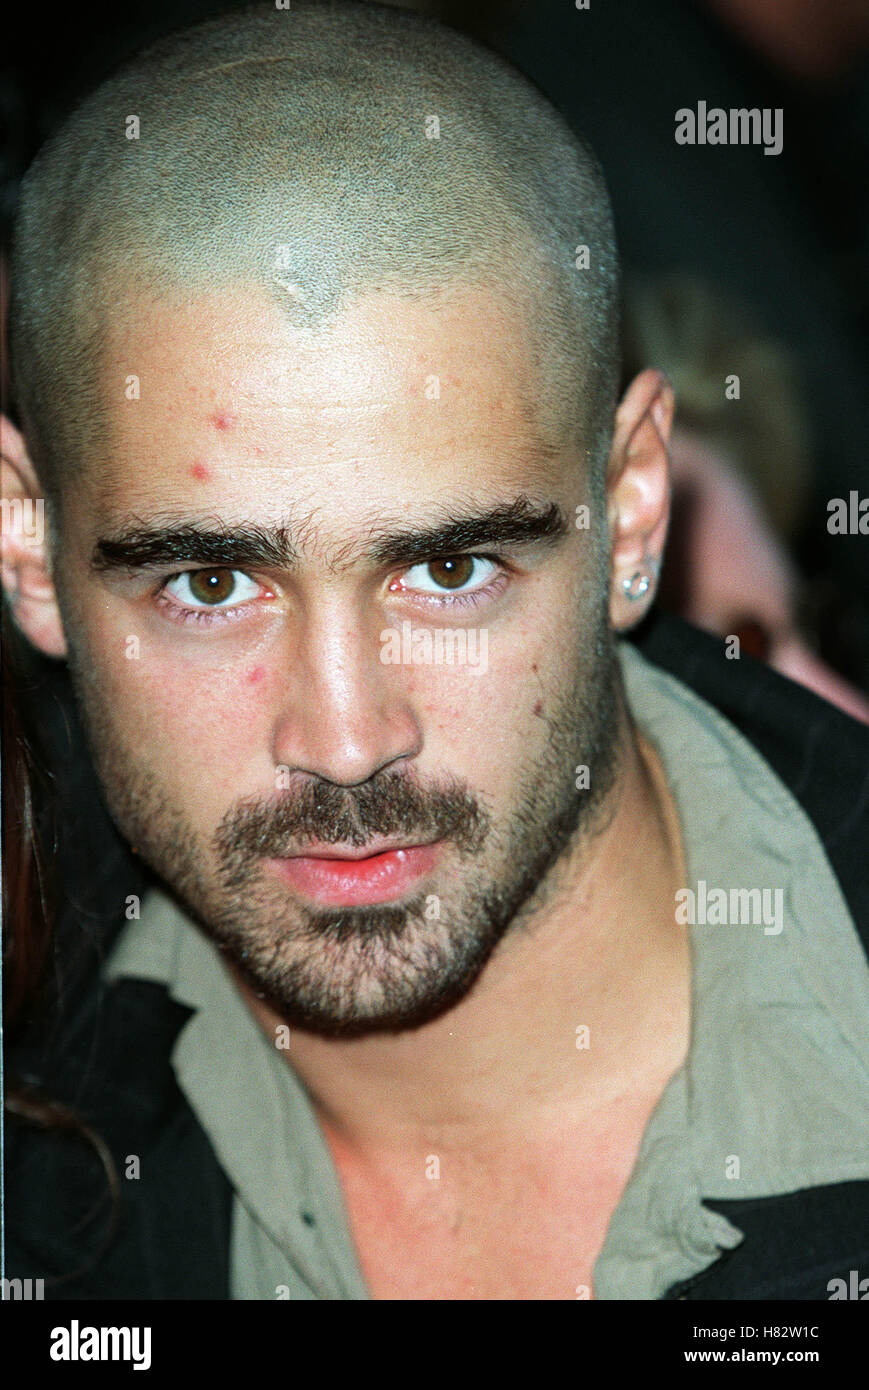 COLIN FARRELL 'AMERICAN OUTLAWS' FILM PREM HOLLYWOOD LOS ANGELES USA 14 August 2001 Stock Photo